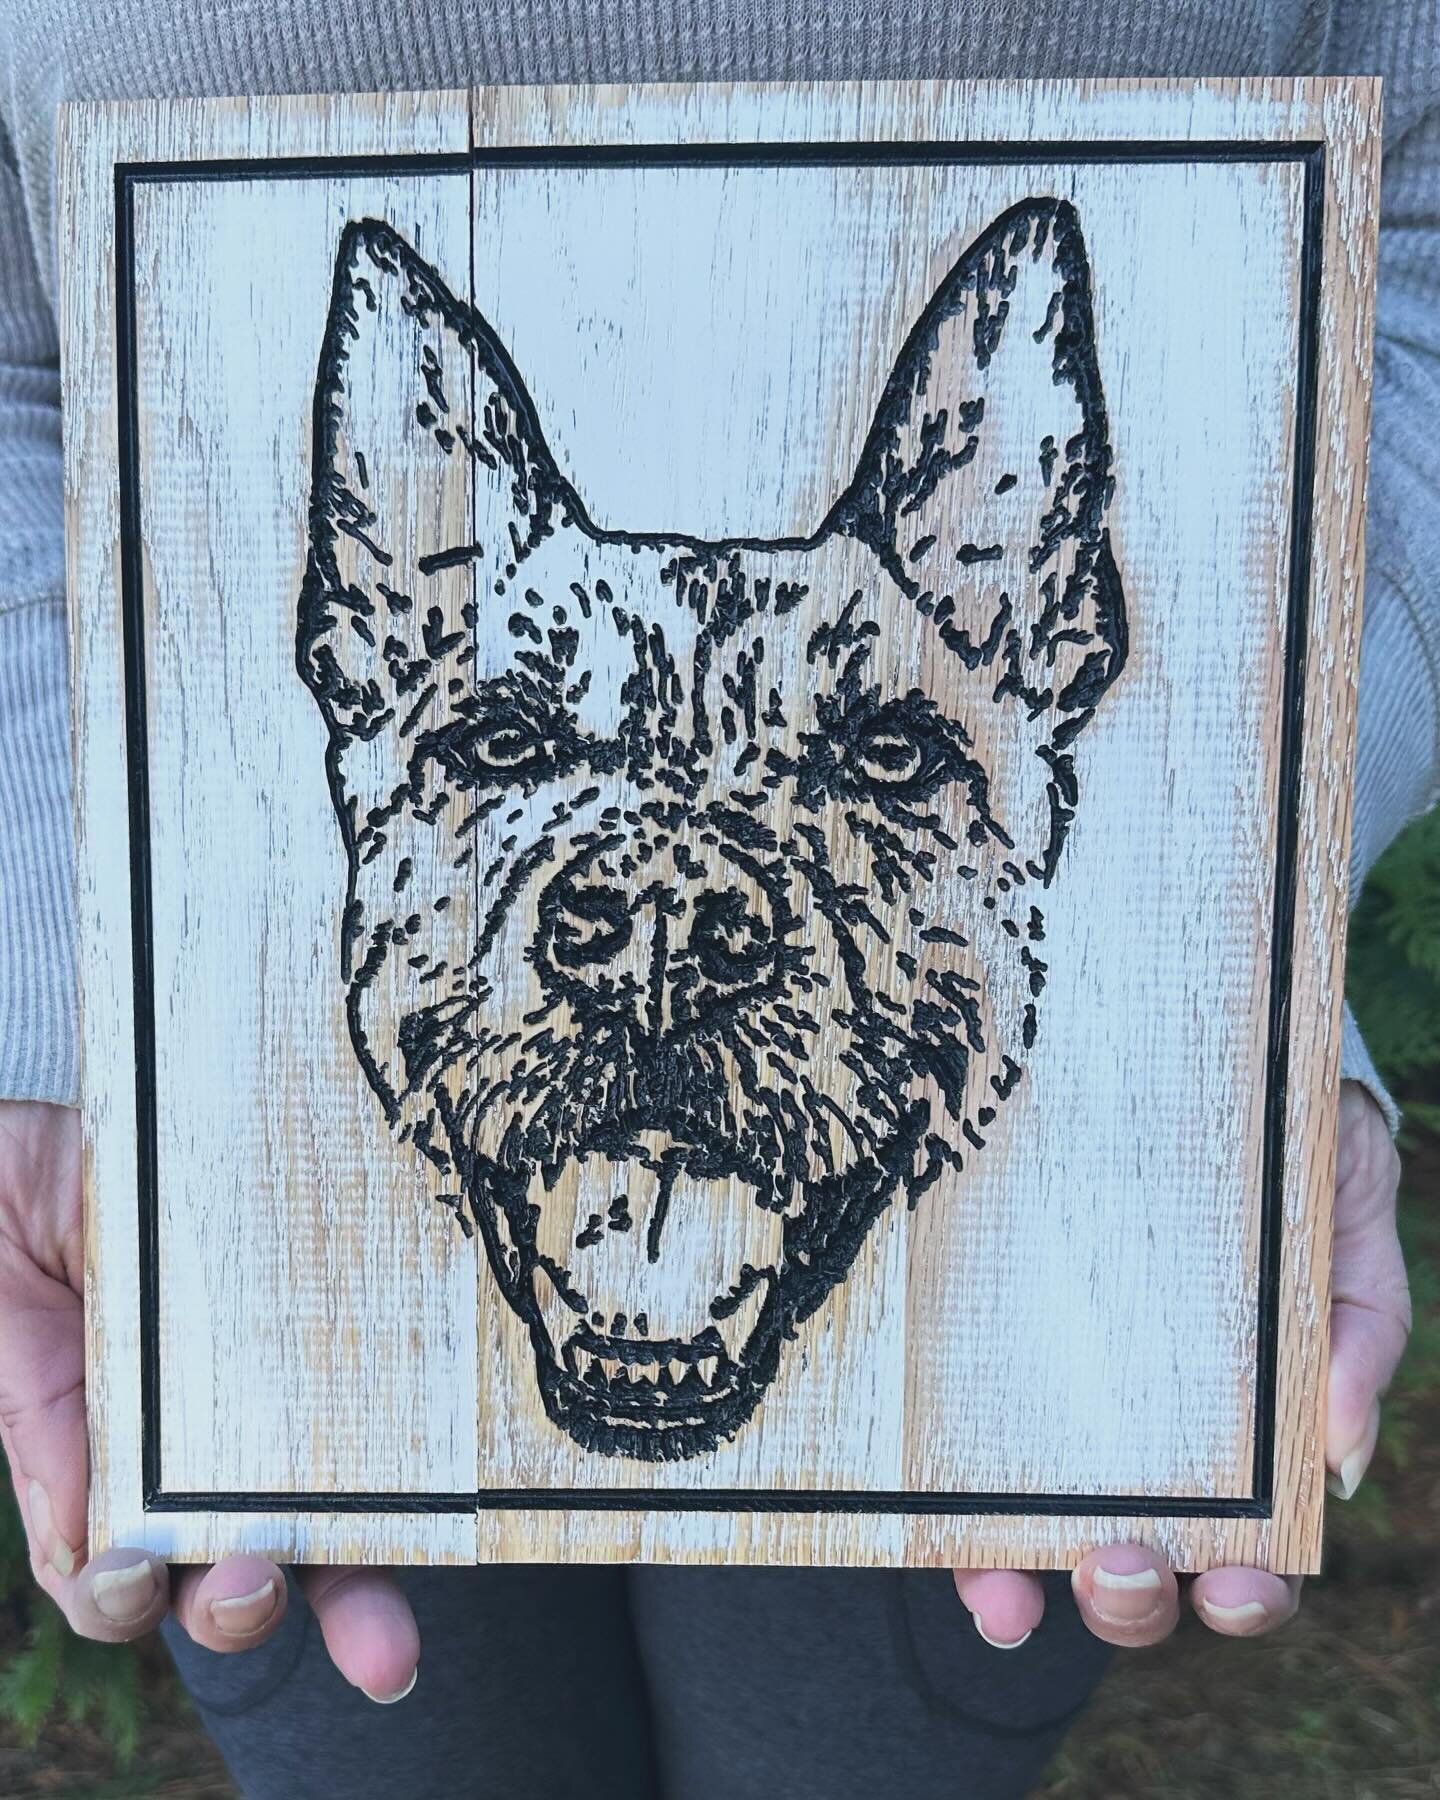 Your favorite pet photo &hearts;️💜❤️ Engraved and hand painted 

#doglover #dogs #dogsofinstagram #dogstagraming #doglovers #petportrait #dogfluencer #dogfluencers #oidela #local #delaware #woodworker #petlovers #doglife